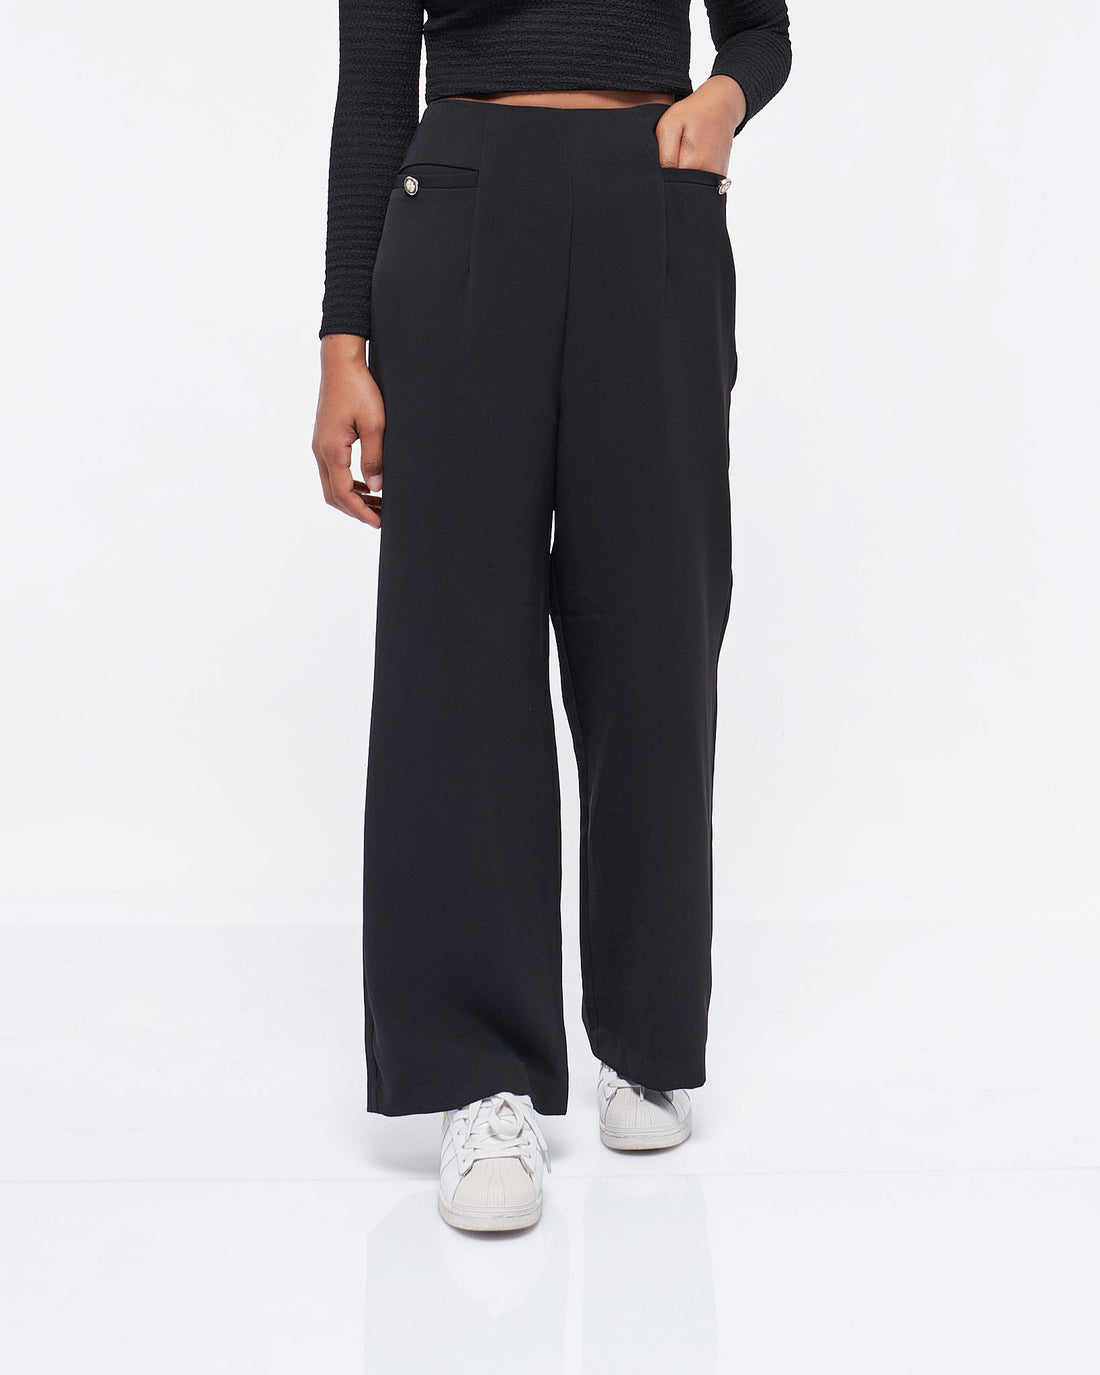 MOI OUTFIT-Front Pocket Wide Leg Lady Pants 17.50